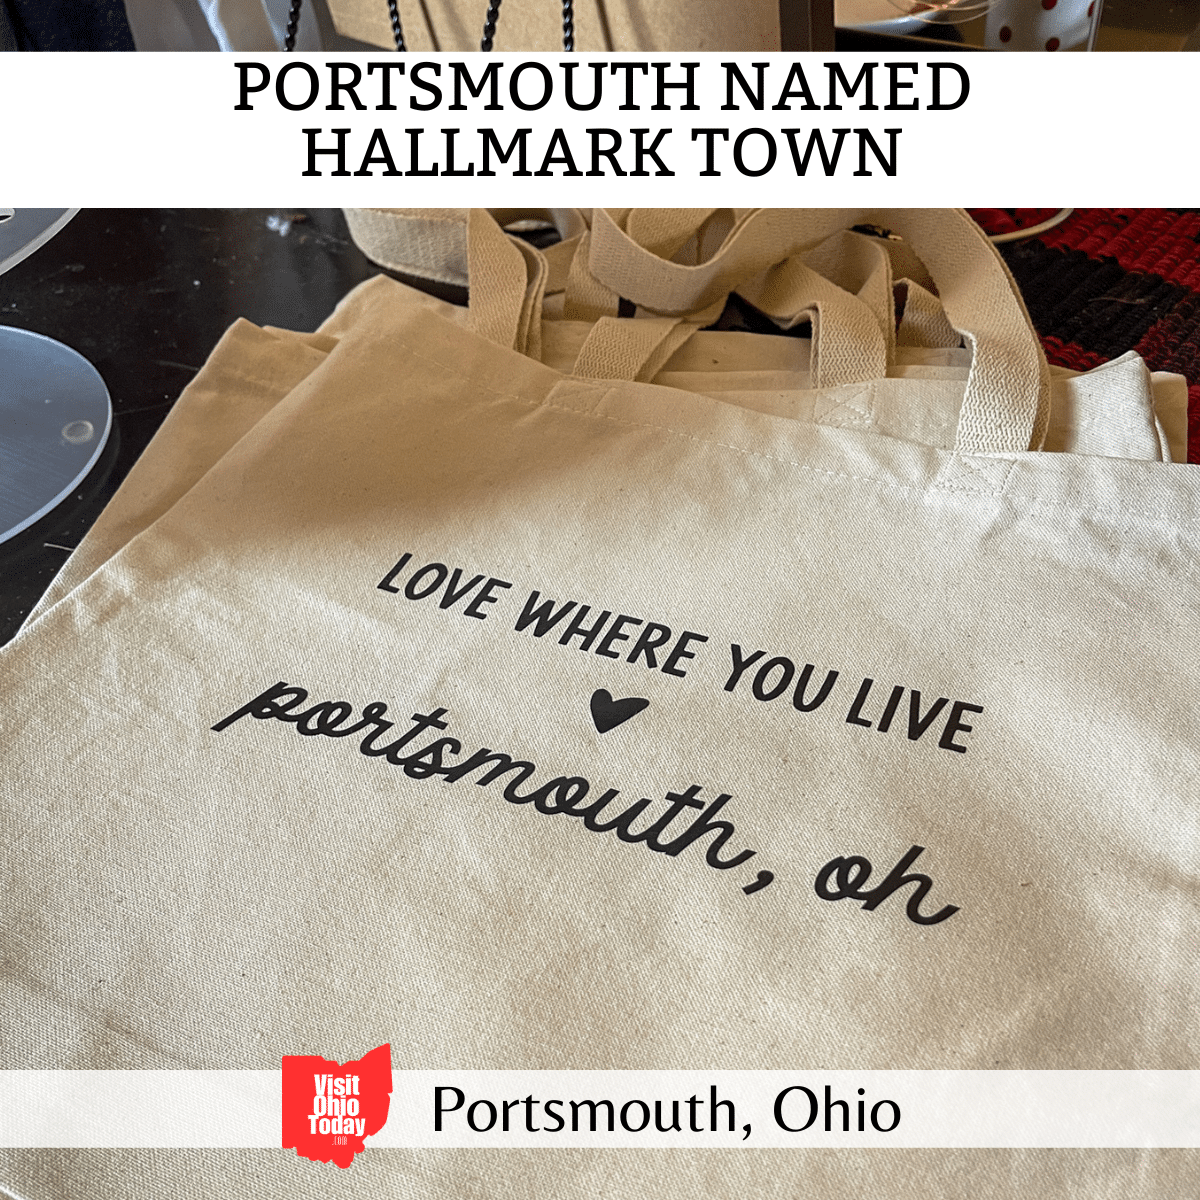 square image with a photo of a small pile of white shopping bags with Love where you Live, Portsmouth Oh, printed on them. A white strip across the top has the text Portsmouth Named Hallmark Town